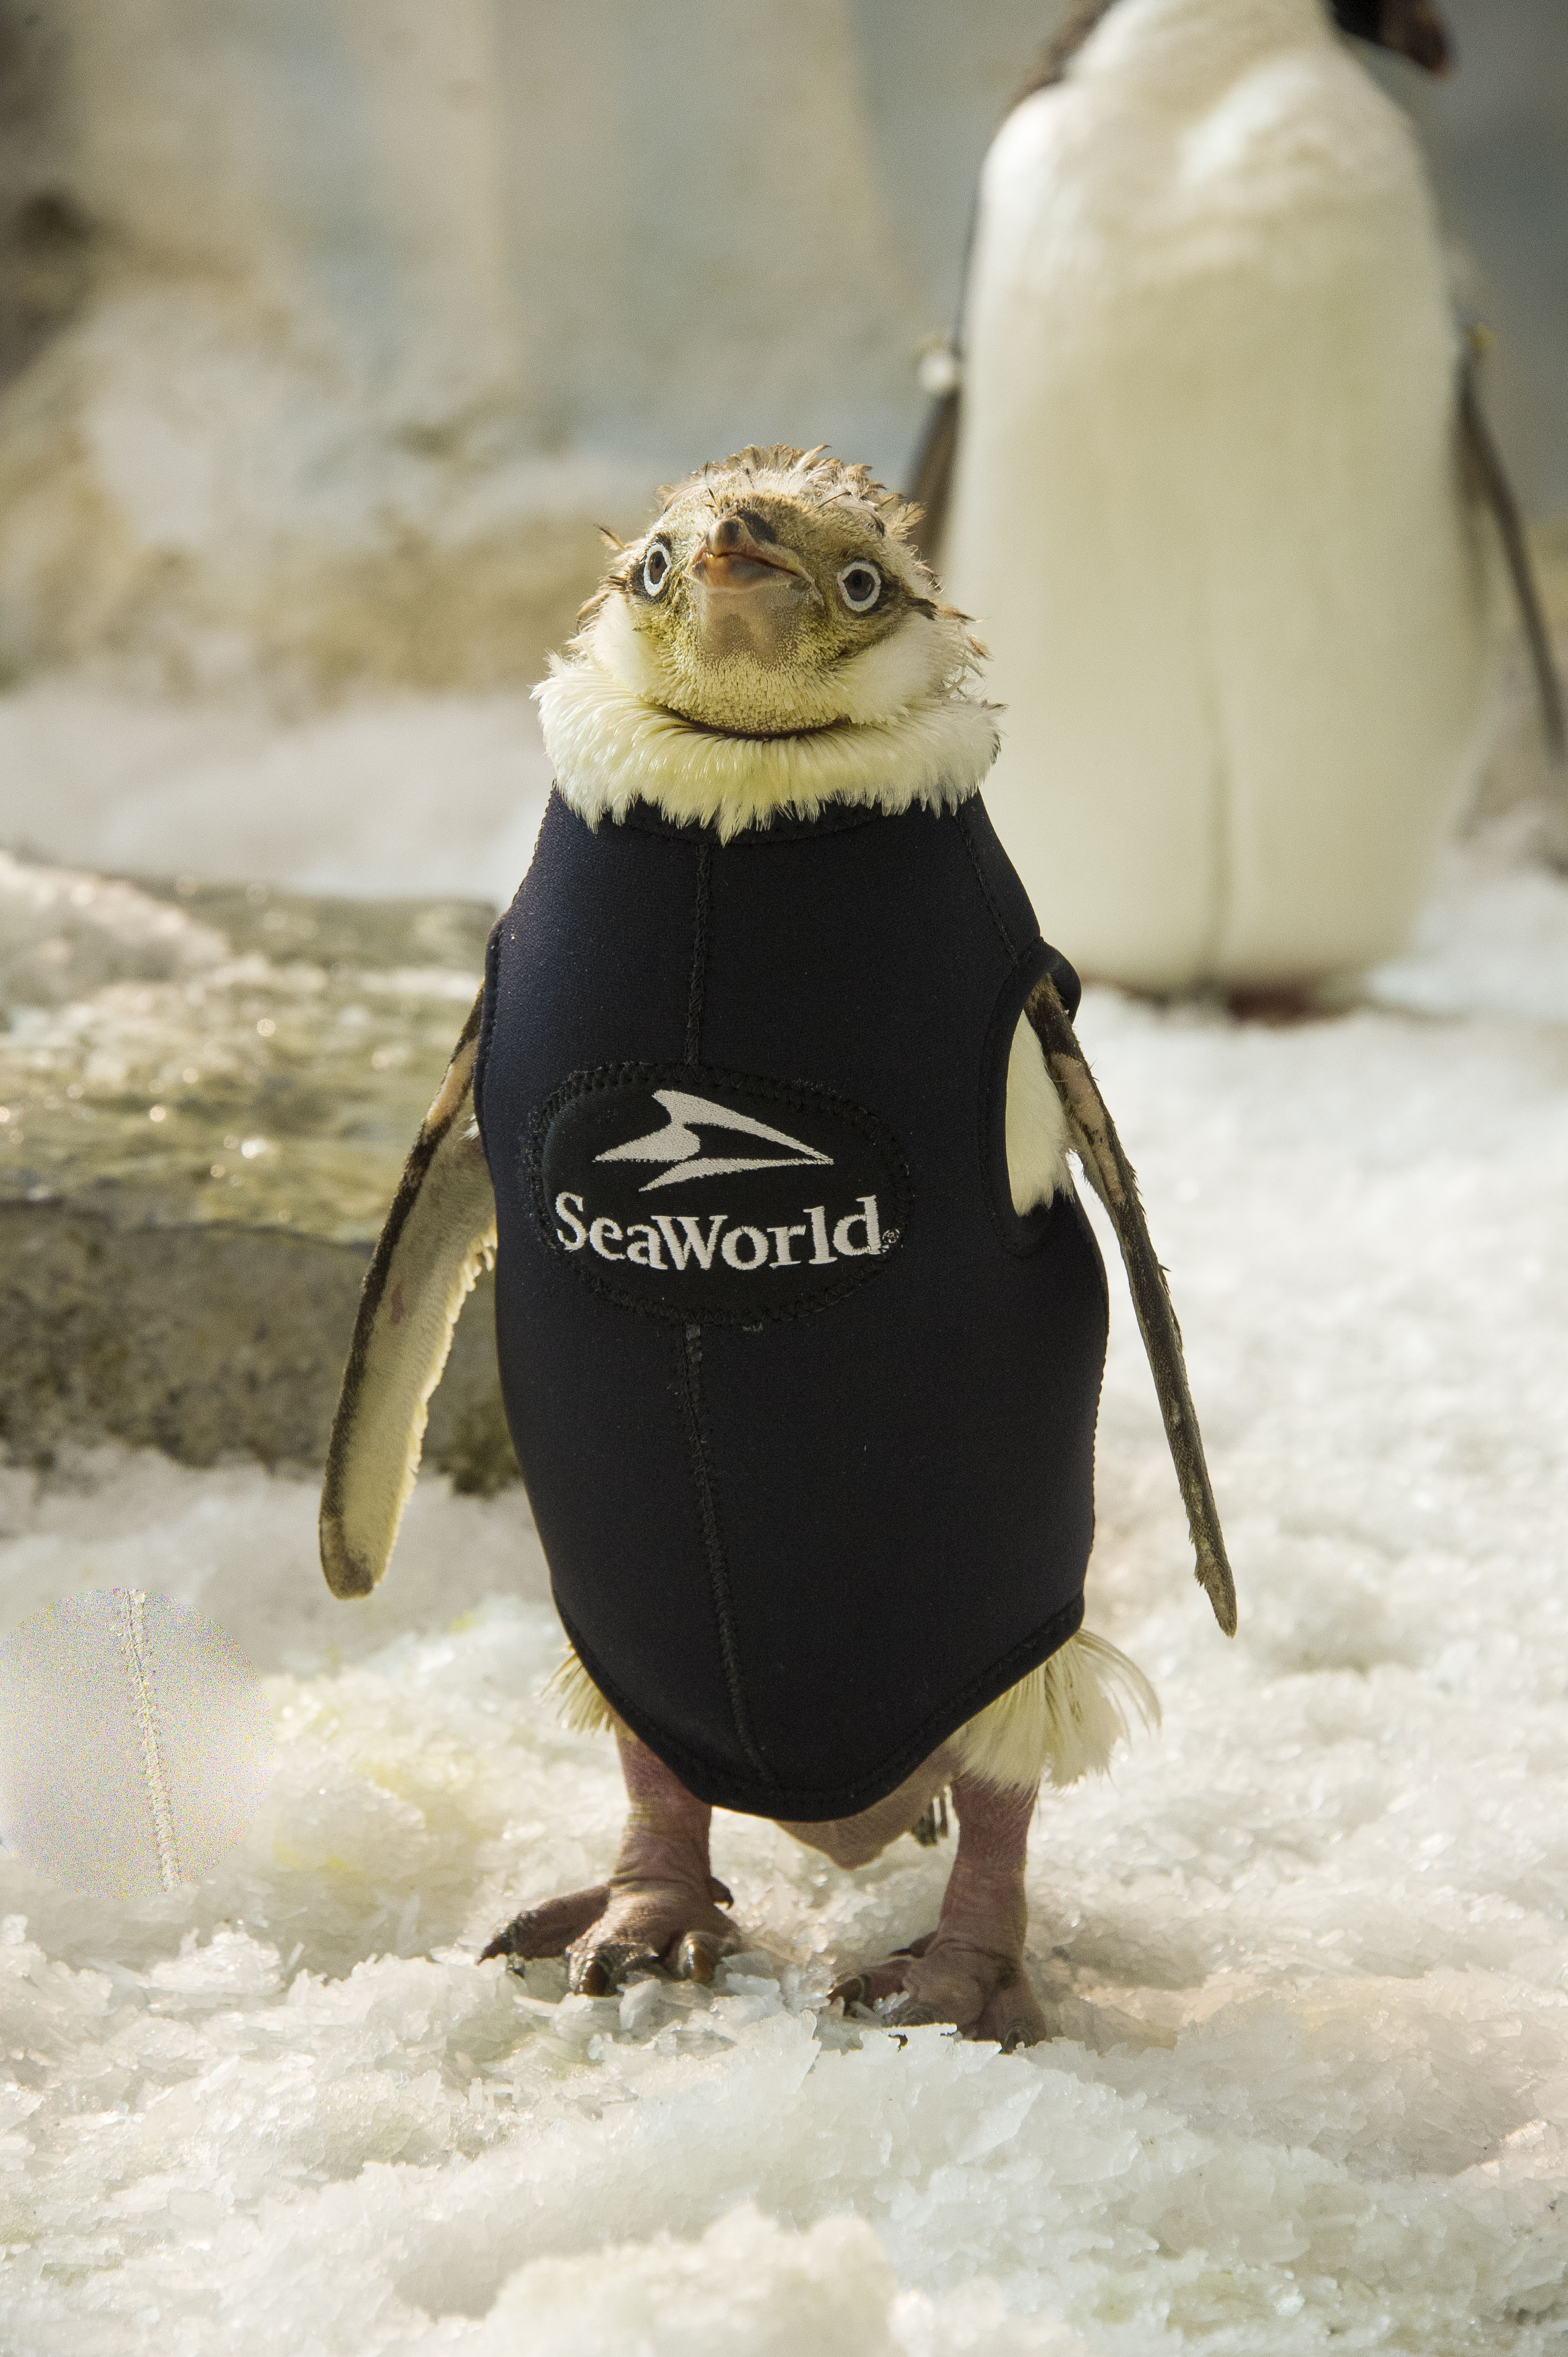 SeaWorld Orlando Creates One-of-a-Kind Wetsuit for Penguin